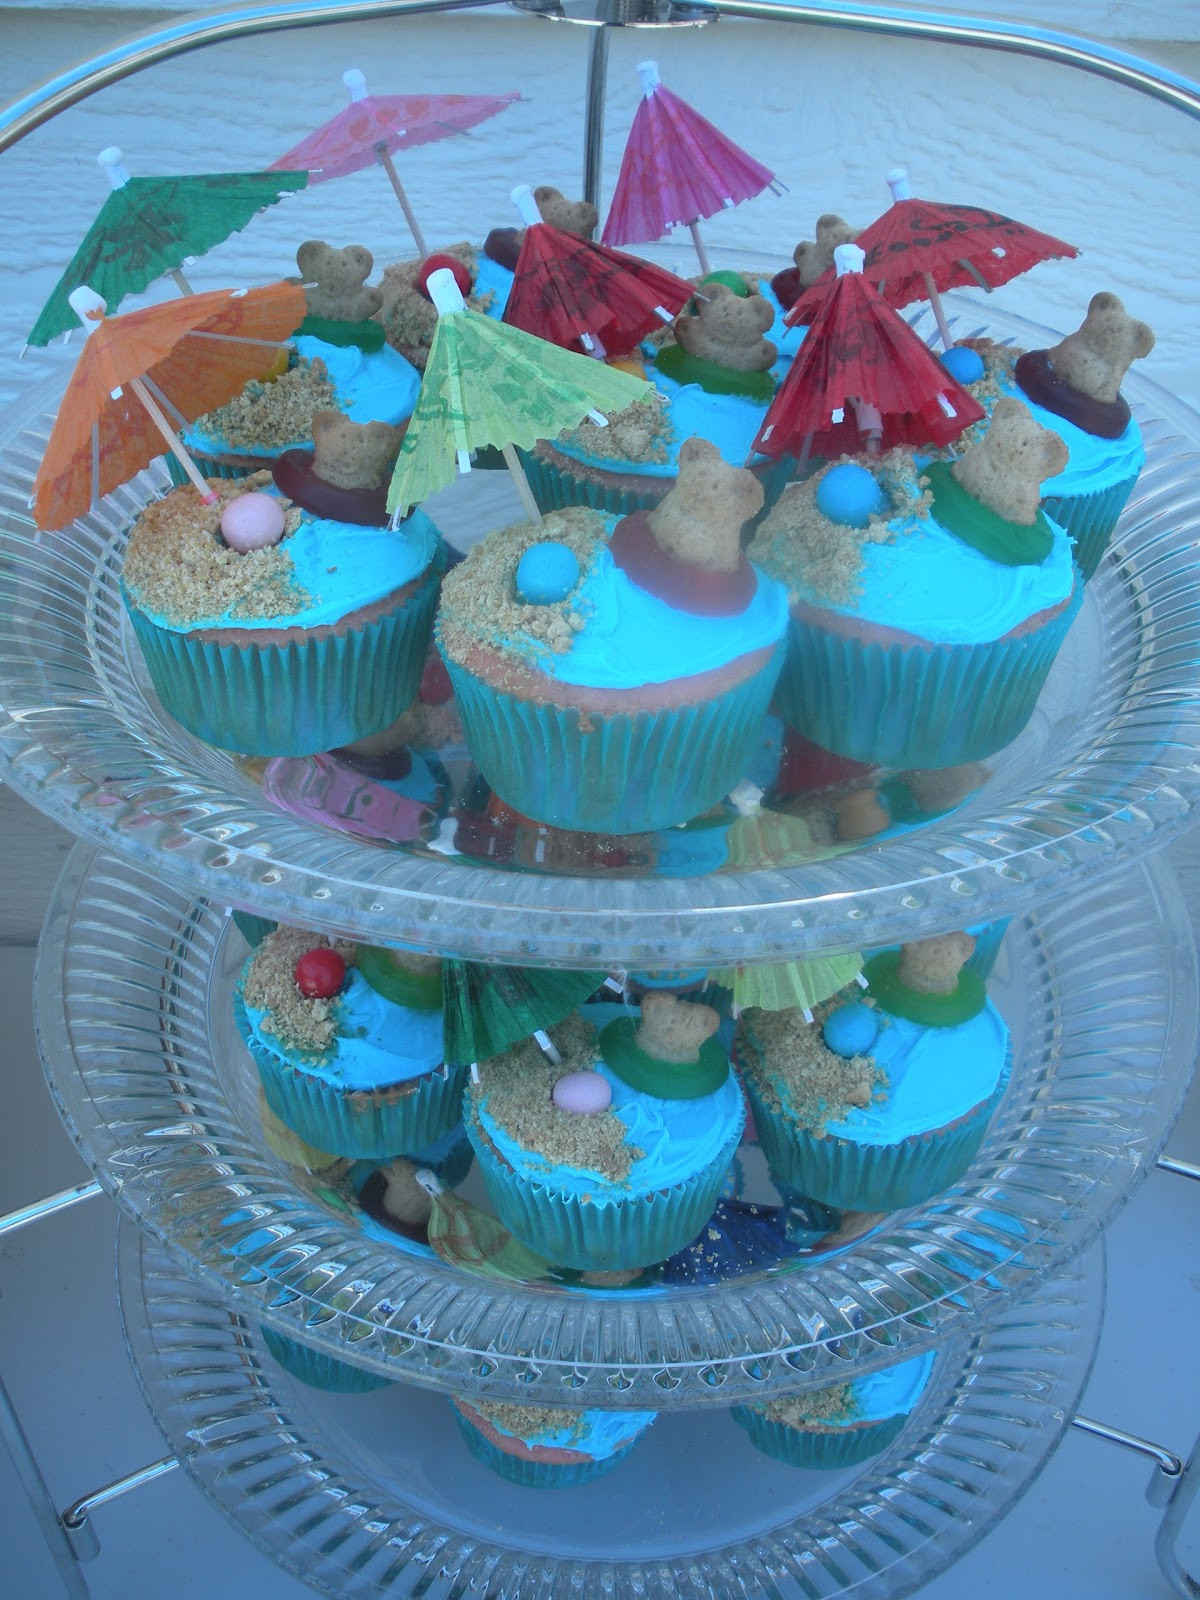 Pool Party Cupcakes Ideas
 Wel e to the Mad House Pool party cupcakes